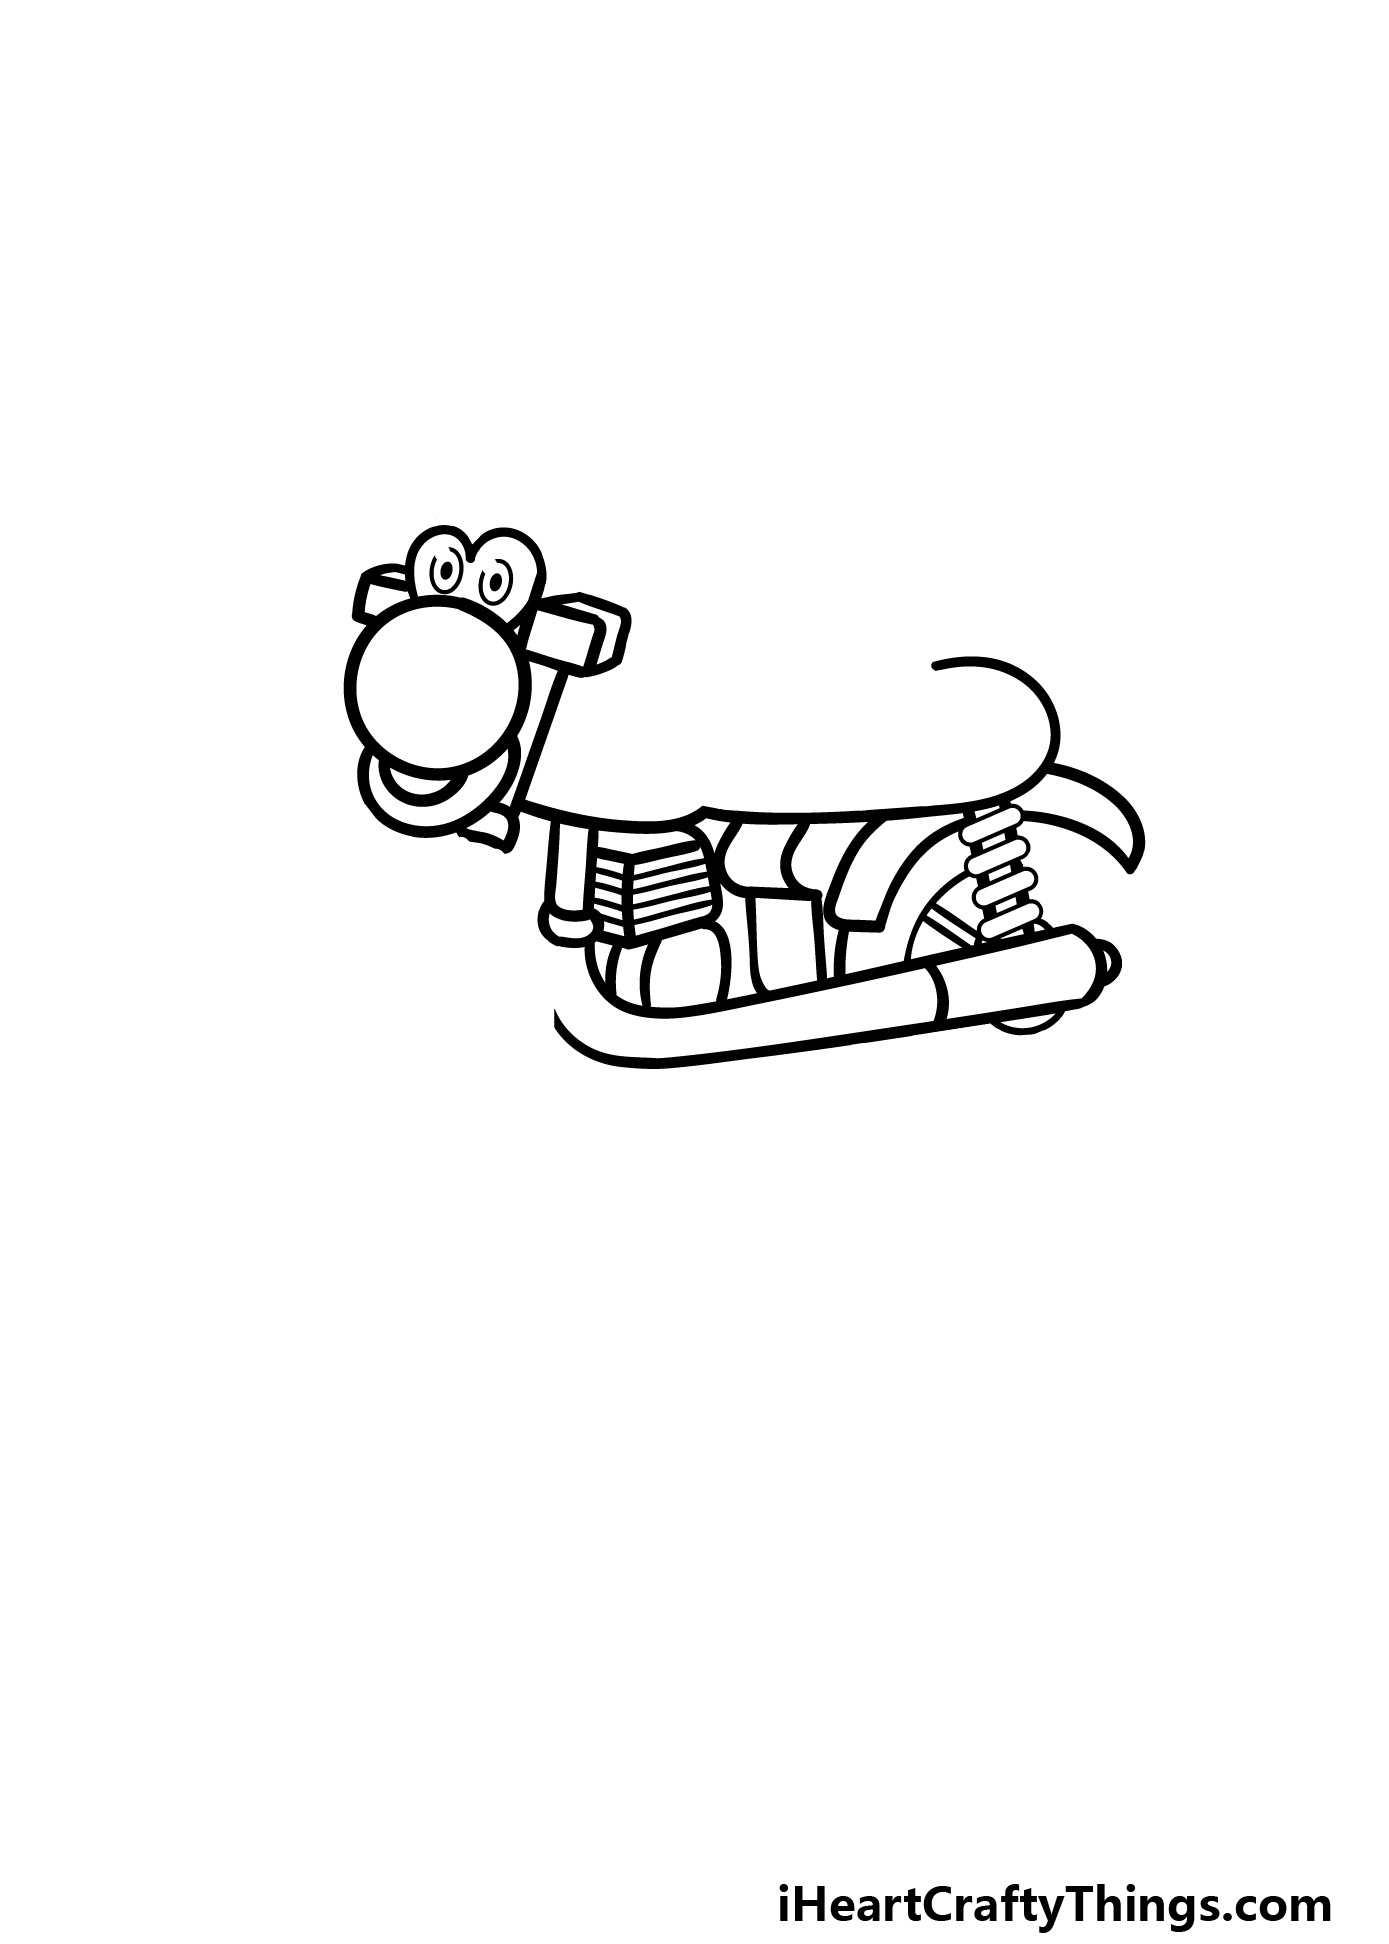 how to draw a cartoon motorcycle step 3